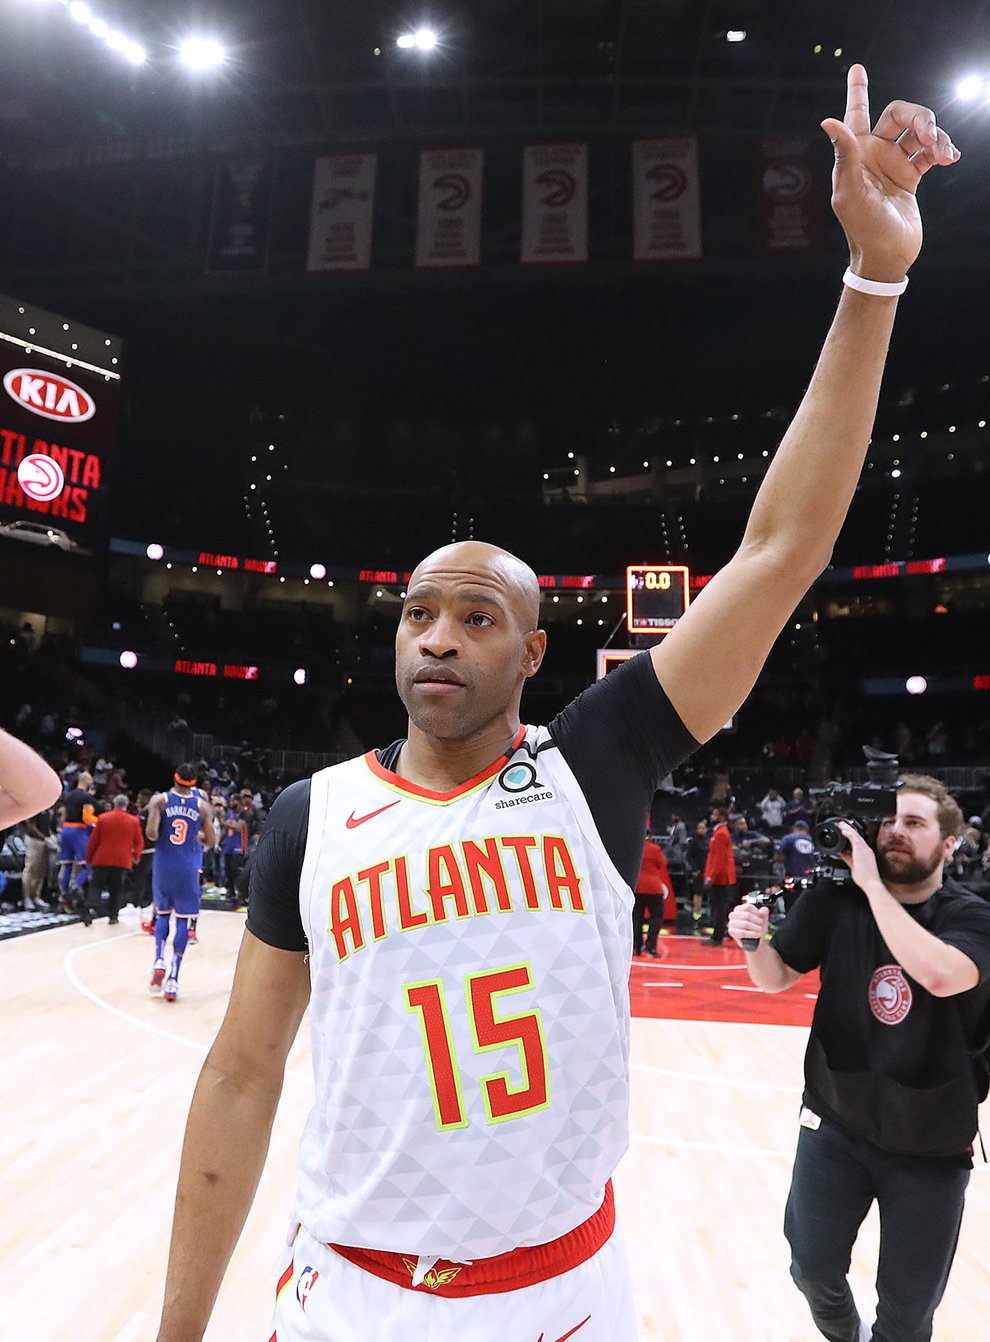 Carter spent the last two years of his career with the Atlanta Hawks